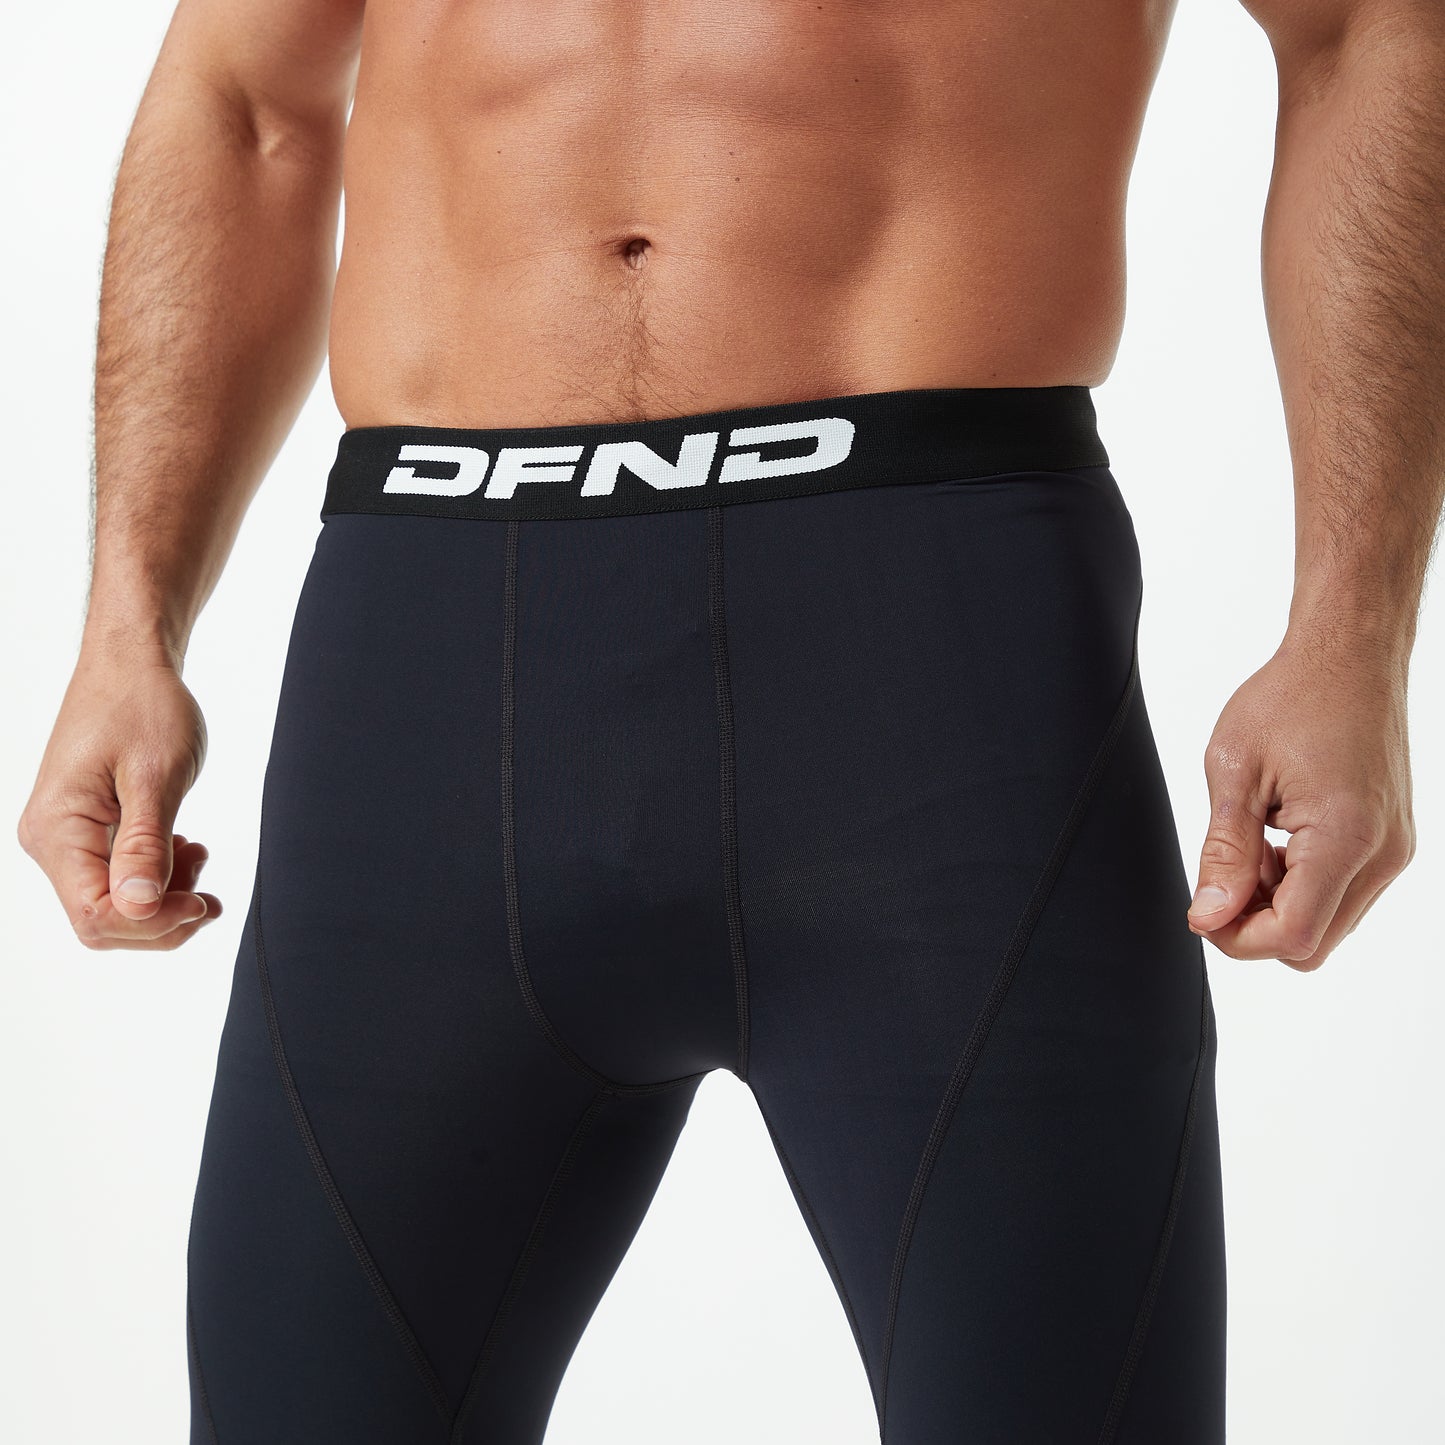 DNFD Active AX Compression Tights Ingredients - CVS Pharmacy